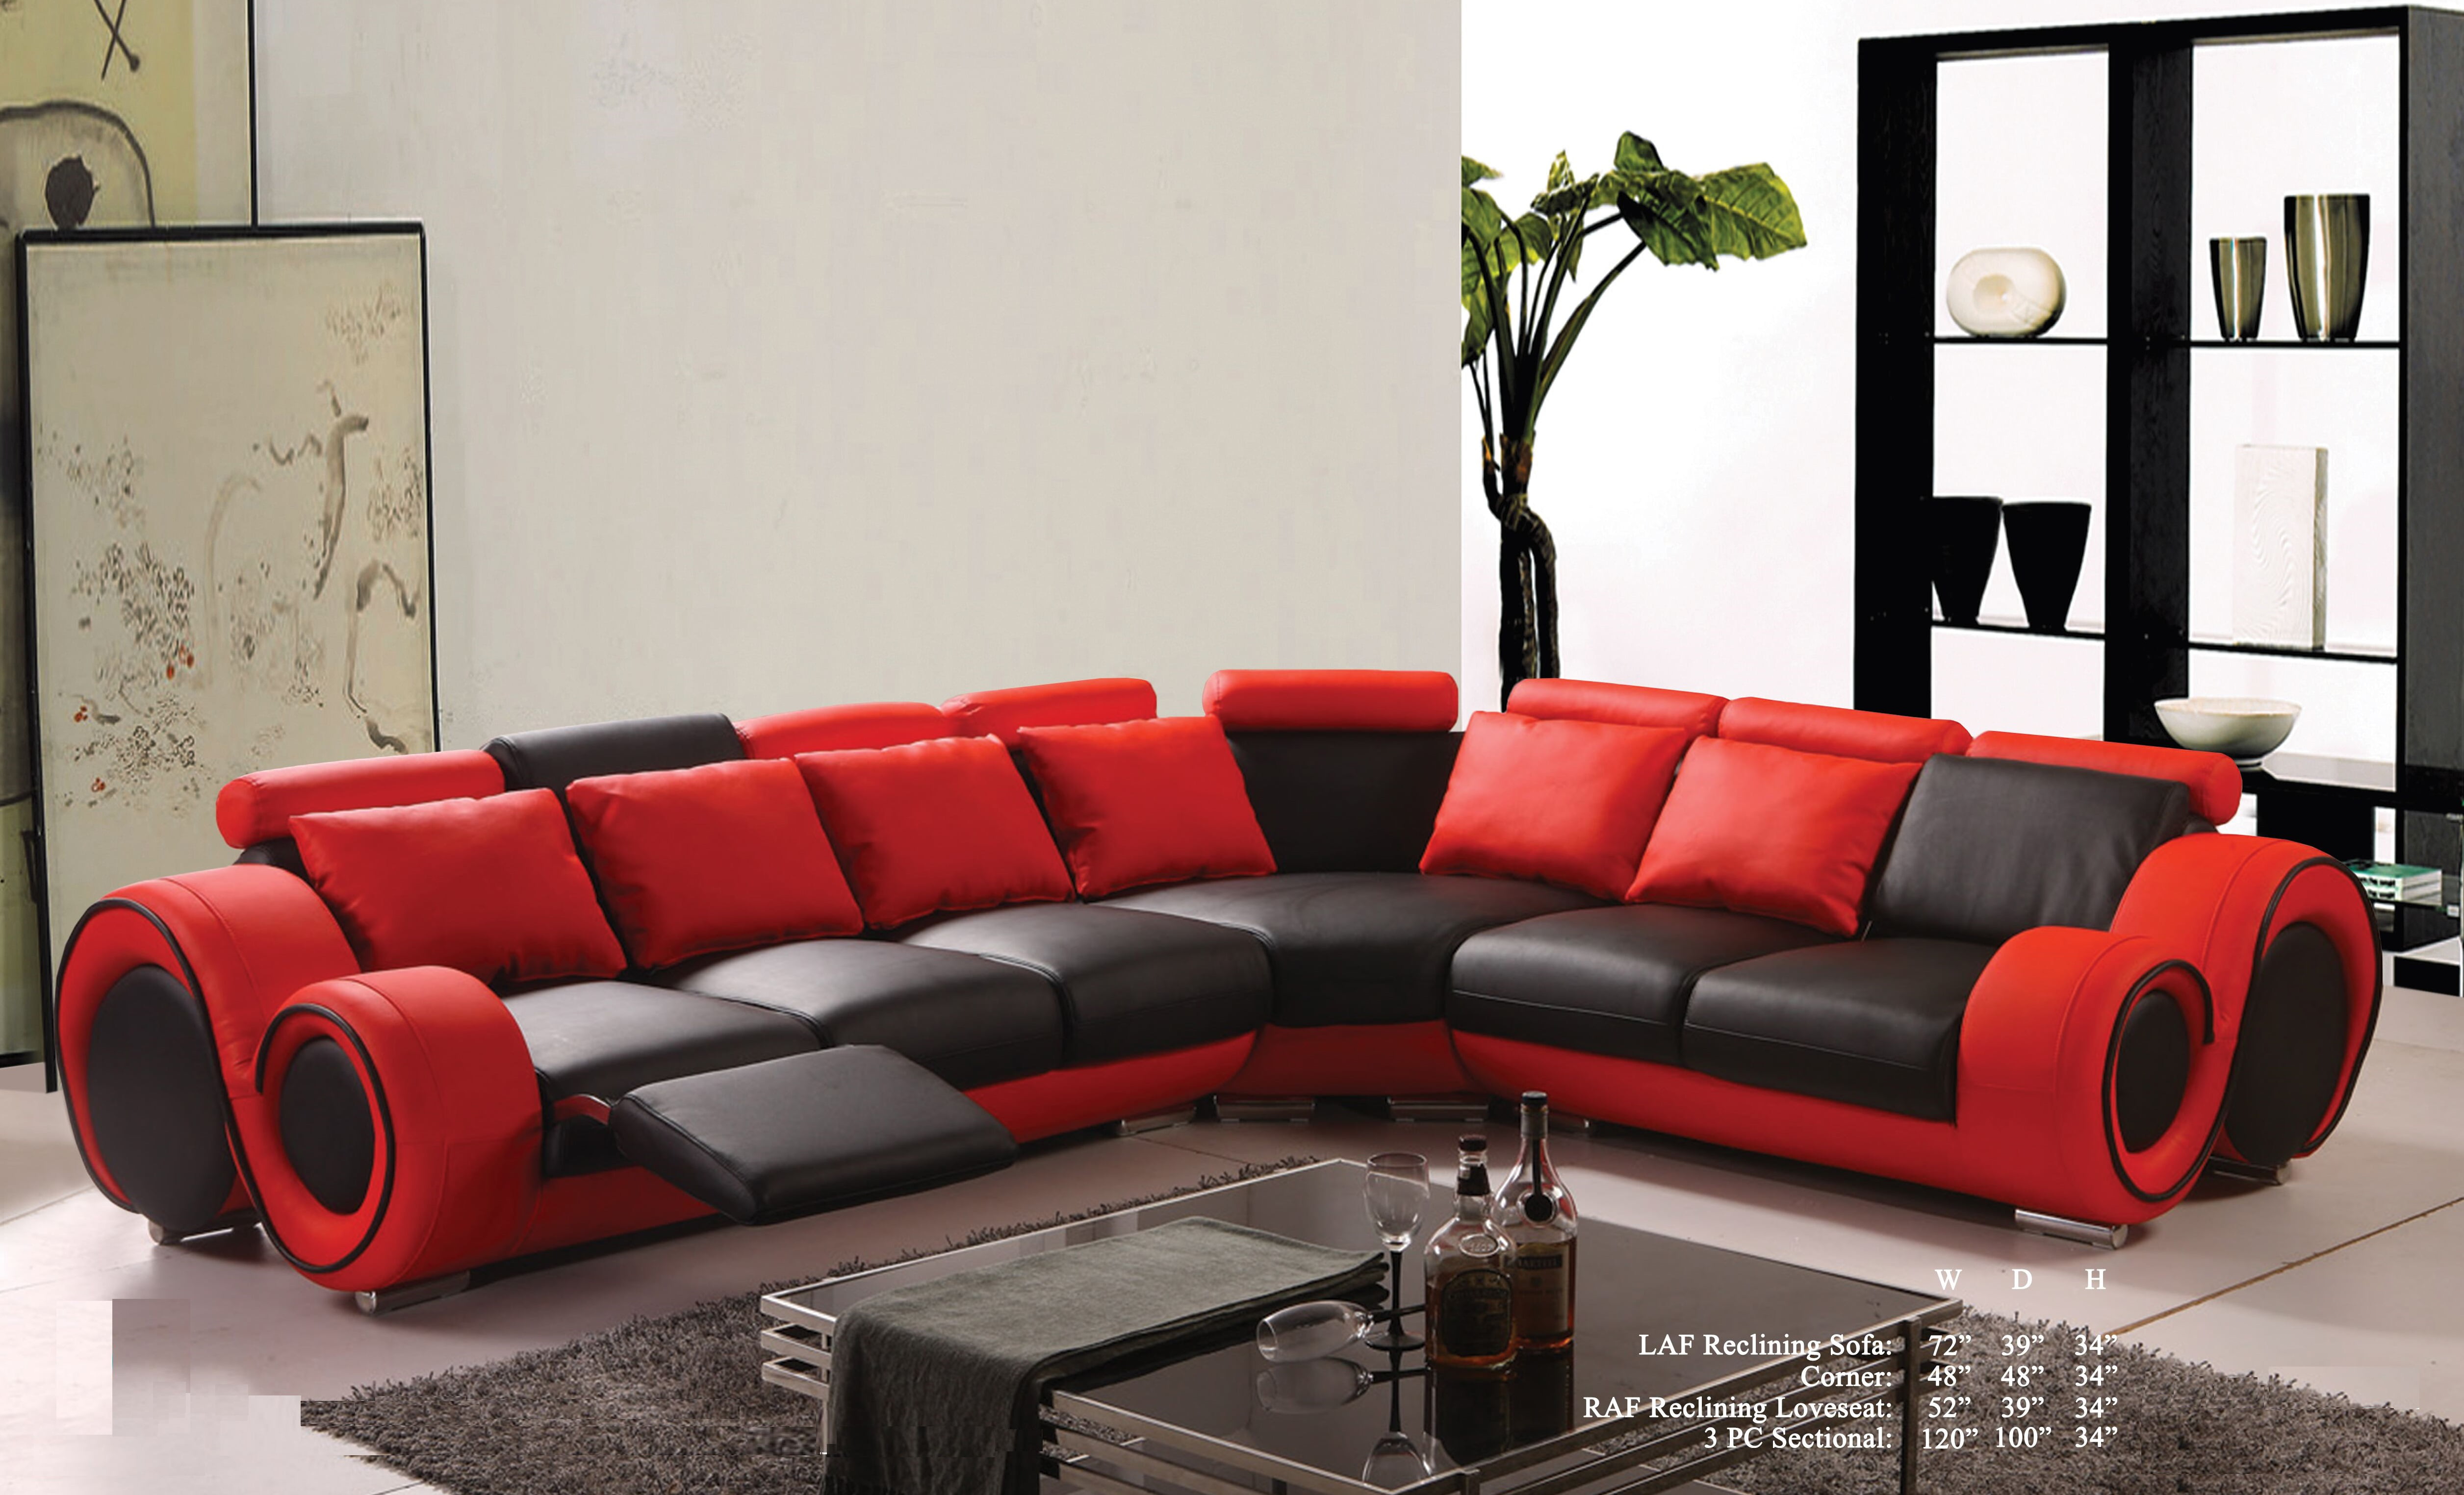 Black Bonded Leather Sectional Sofa Set, Red And Black Leather Living Room Furniture